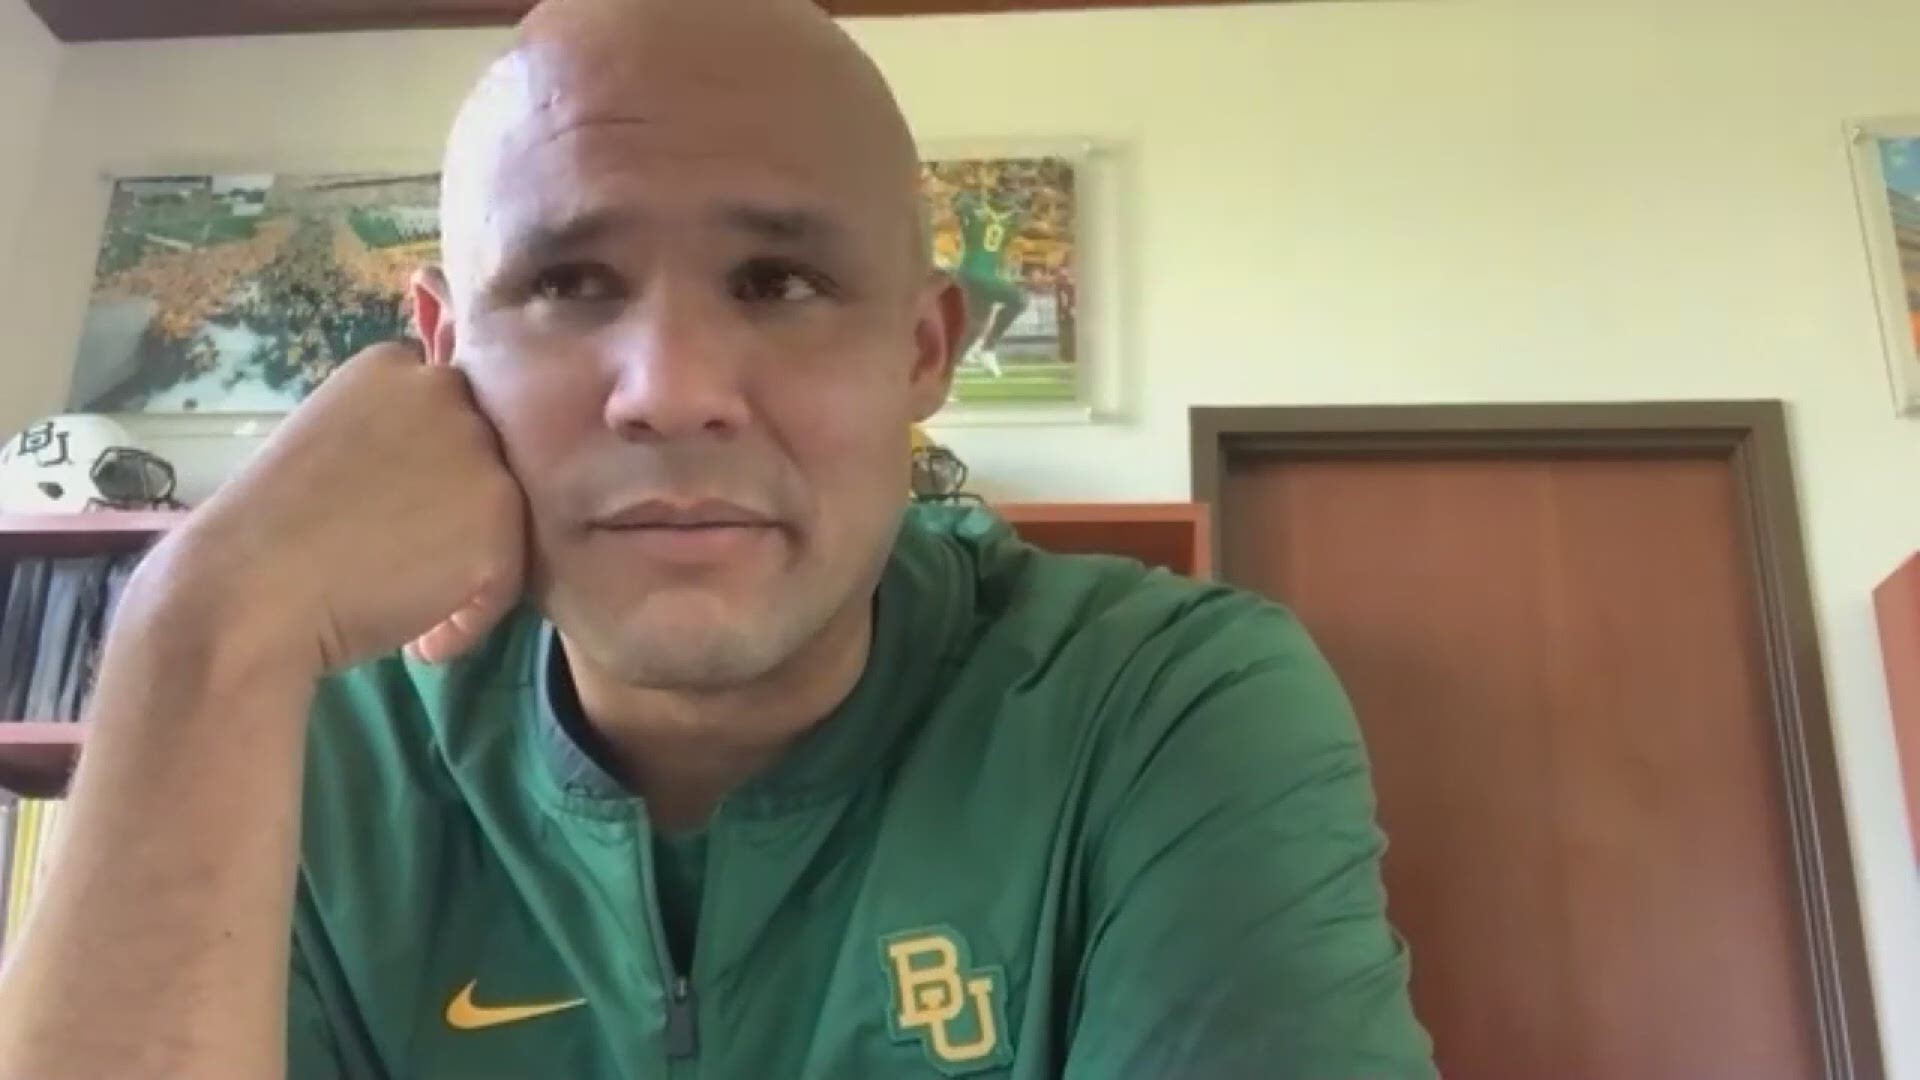 Baylor coach Dave Aranda said Saturday that Friday's news of a blanket waiver for NCAA fall sport athletes was the "right thing to do."